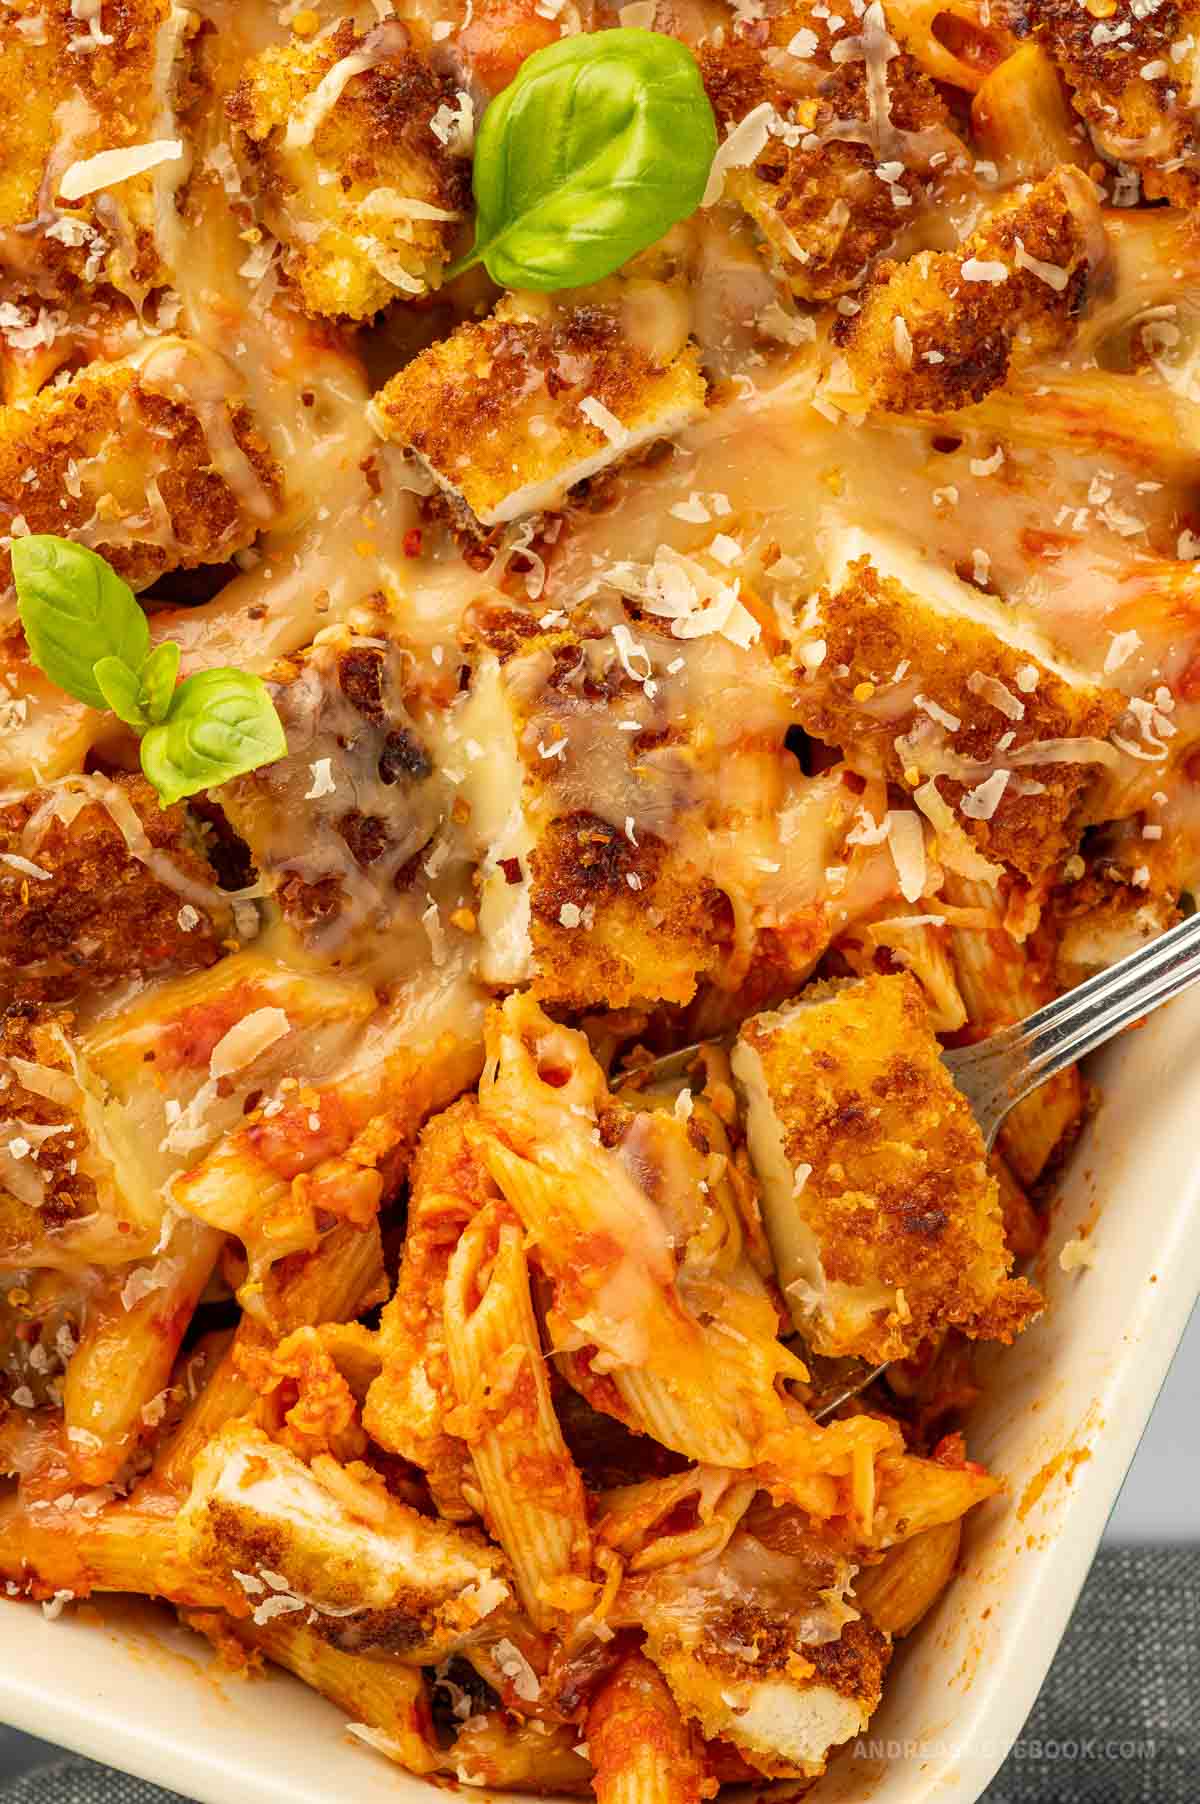 Casserole dish with baked chicken parmesan and penne pasta.